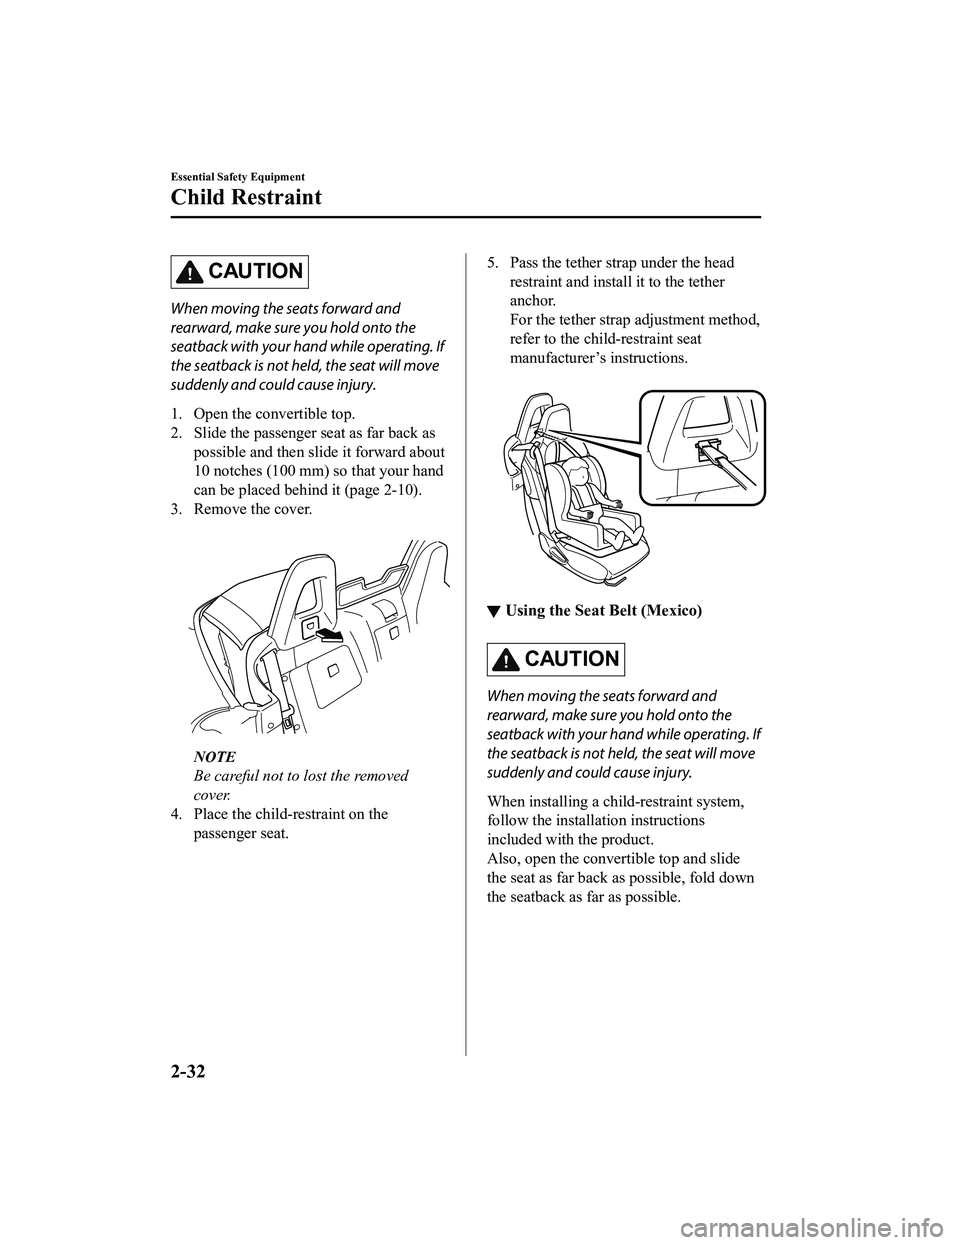 MAZDA MODEL MX-5 MIATA RF 2020 Service Manual CAUTION
When moving the seats forward and
rearward, make sure you hold onto the
seatback with your hand while operating. If
the seatback is not held, the seat will move
suddenly and could cause injury